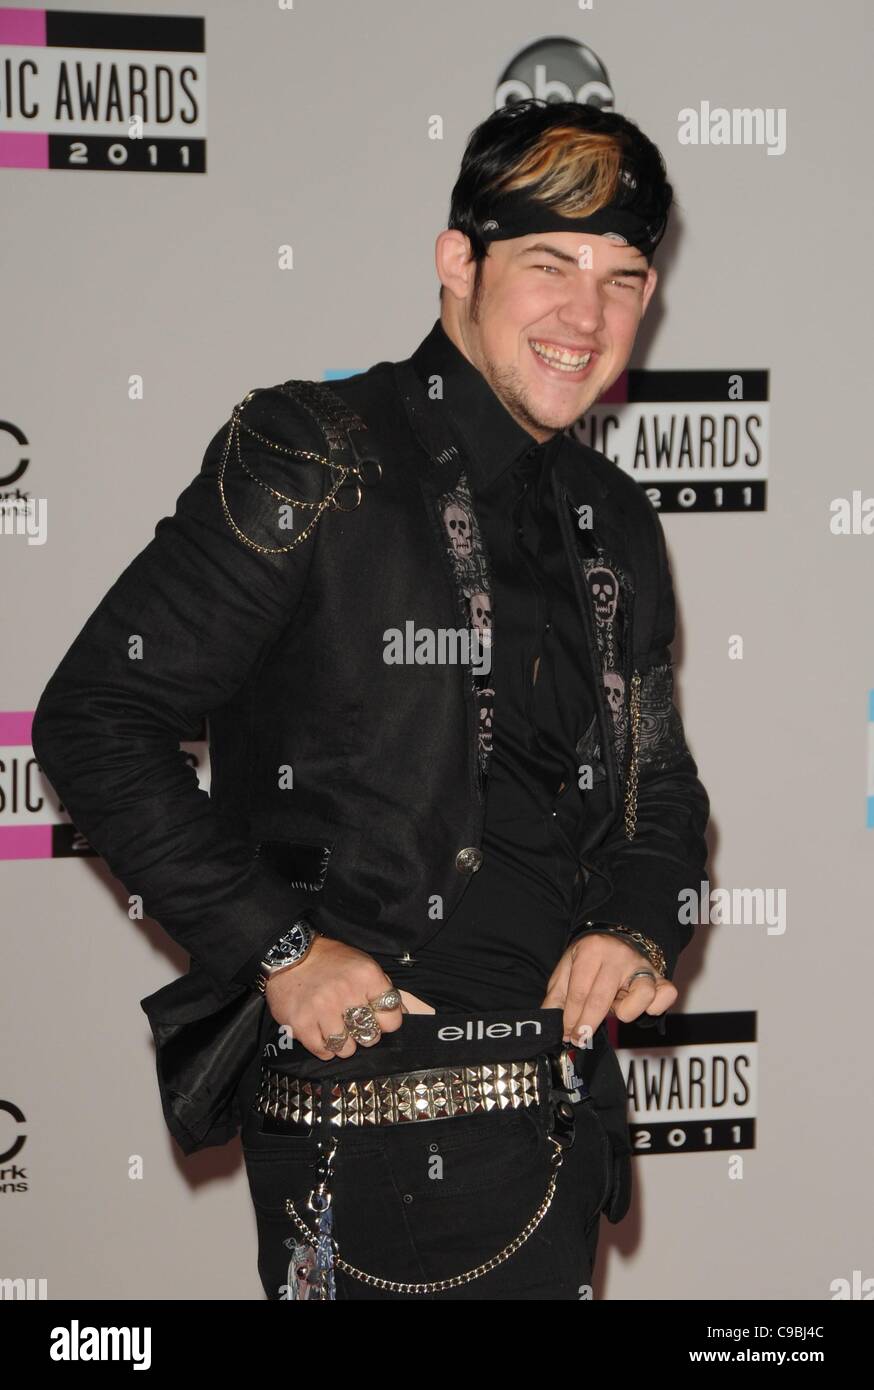 James Durbin at arrivals for The 38th Annual American Music Awards - ARRIVALS, Nokia Theatre at L.A. LIVE, Los Angeles, CA November 20, 2011. Photo By: Dee Cercone/Everett Collection Stock Photo